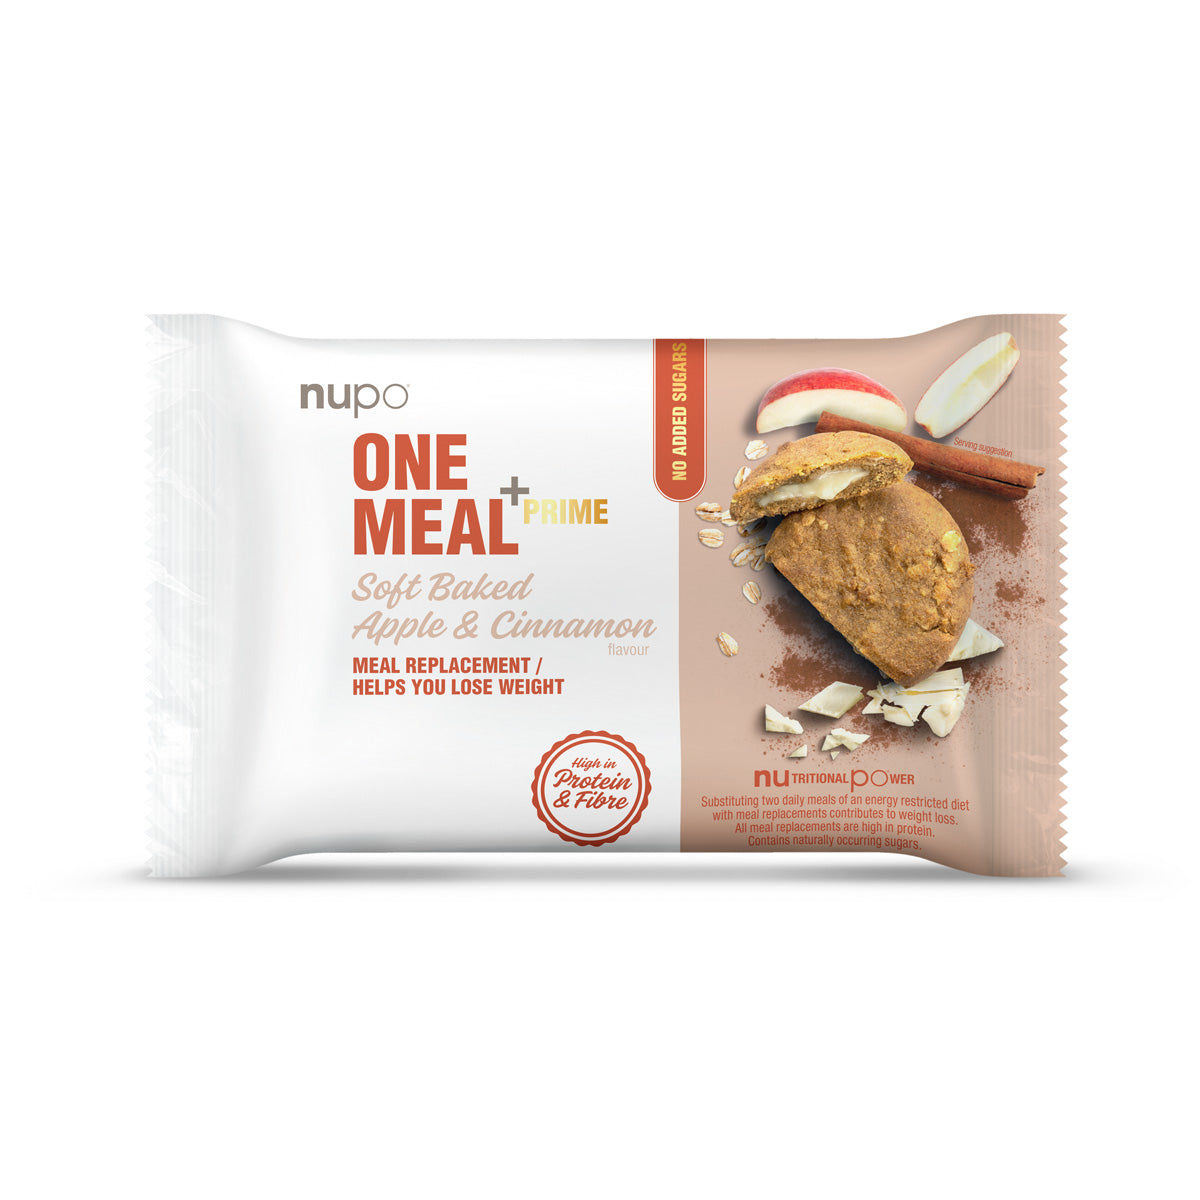 Se Nupo One Meal +Prime (70g) - Apple and Cinnamon hos Muscle House